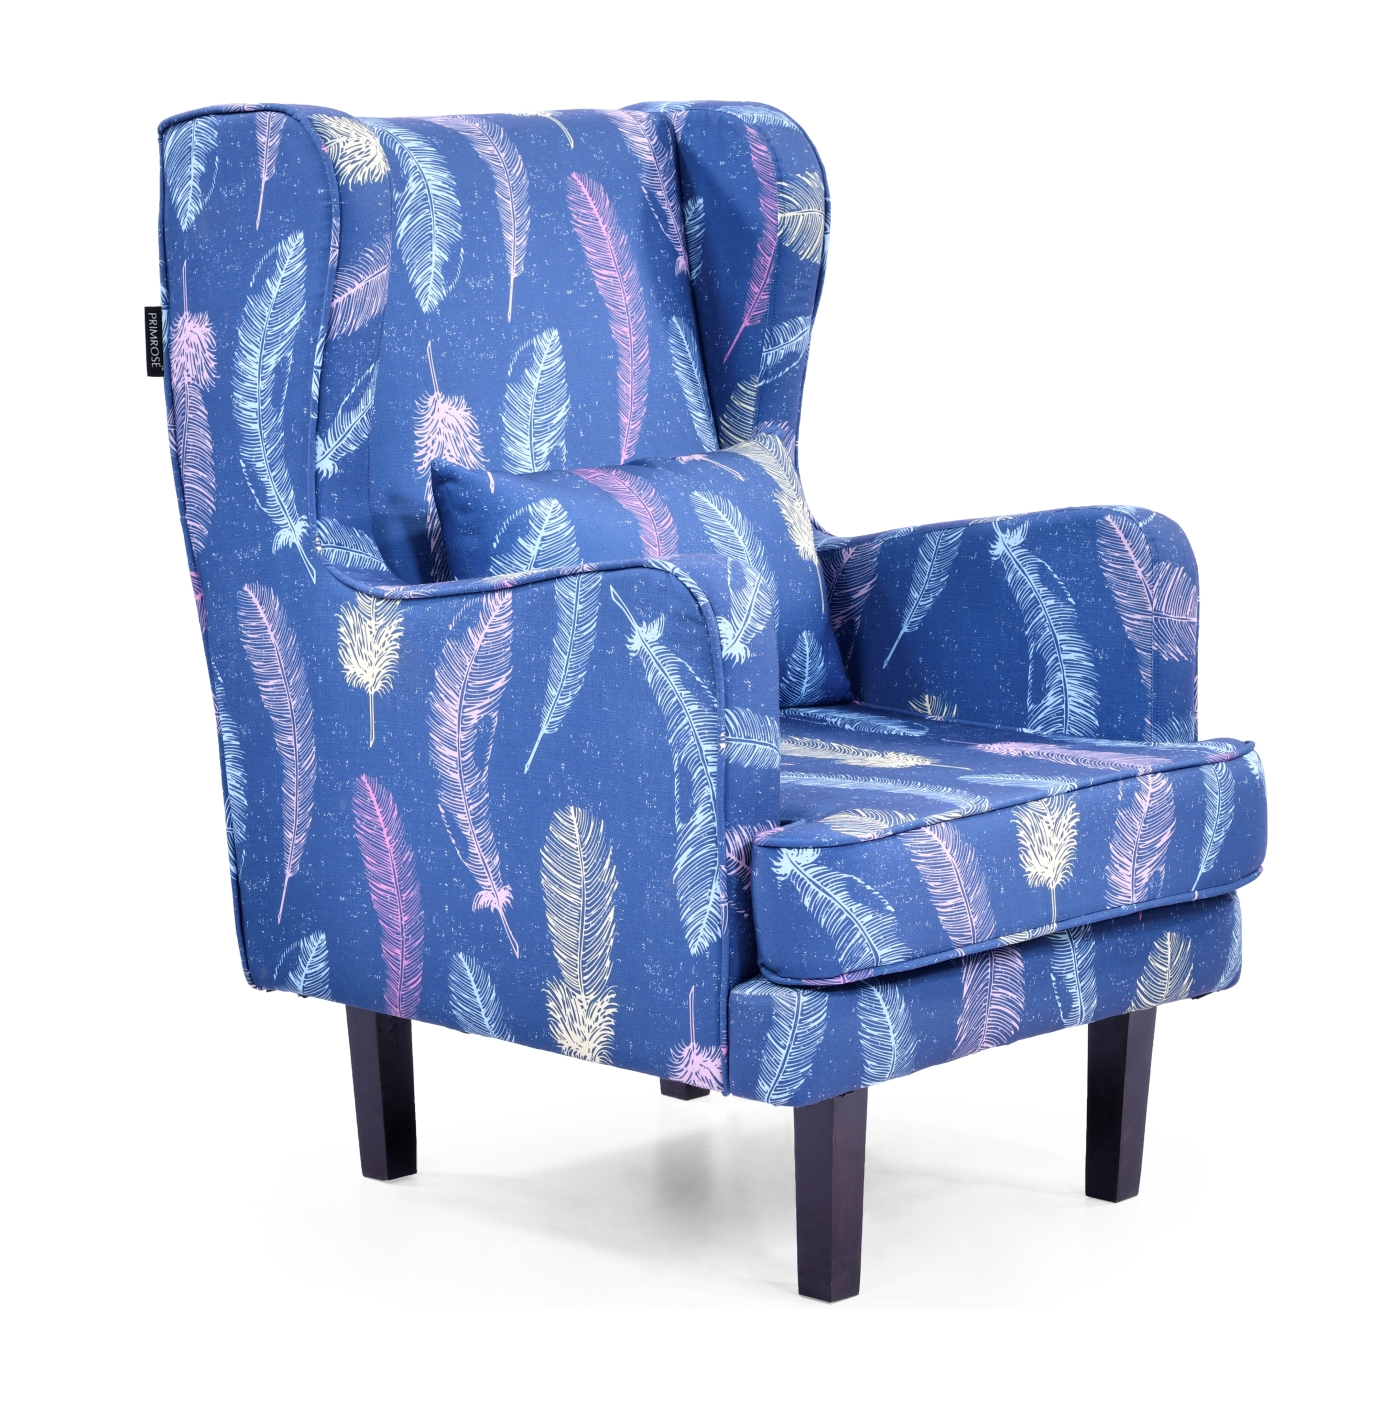 PRIMROSE Dream Feature Digital Printed Faux Linen Fabric High Back Wing Chair Combo (2 Chair+1 Ottoman) - Blue  